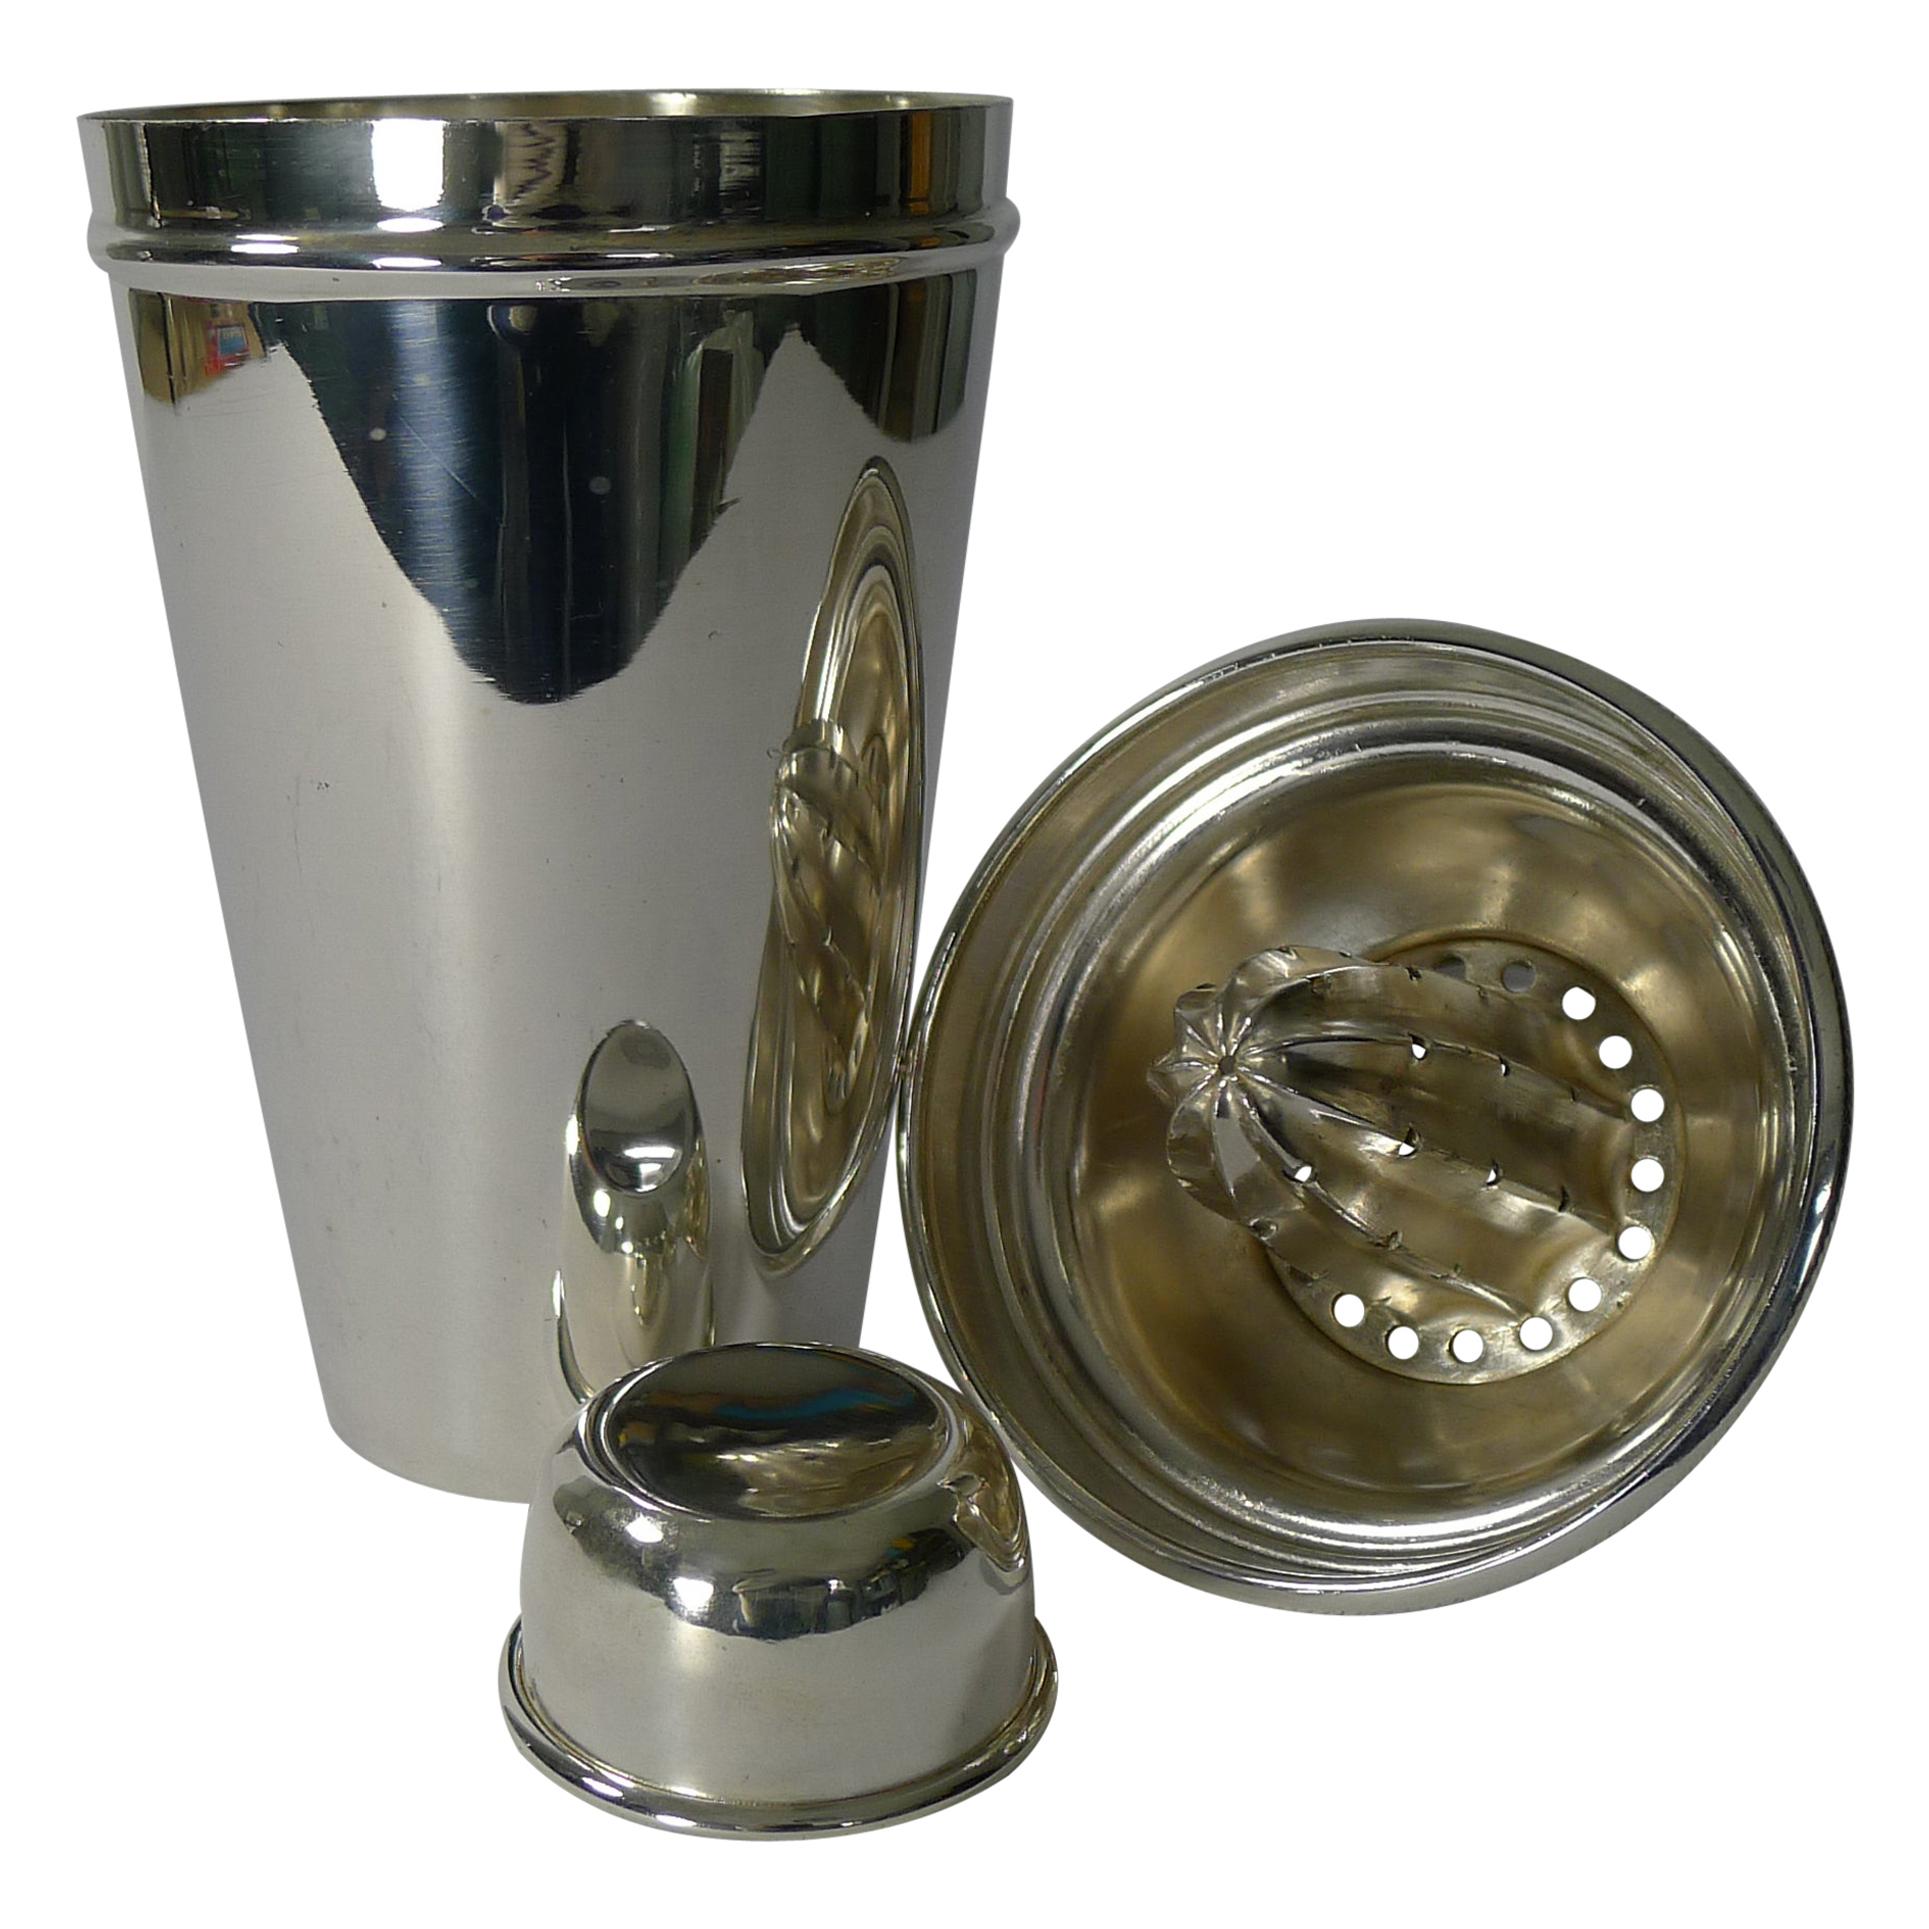 English Silver Plated Cocktail Shaker with Lemon Squeezer, circa 1930